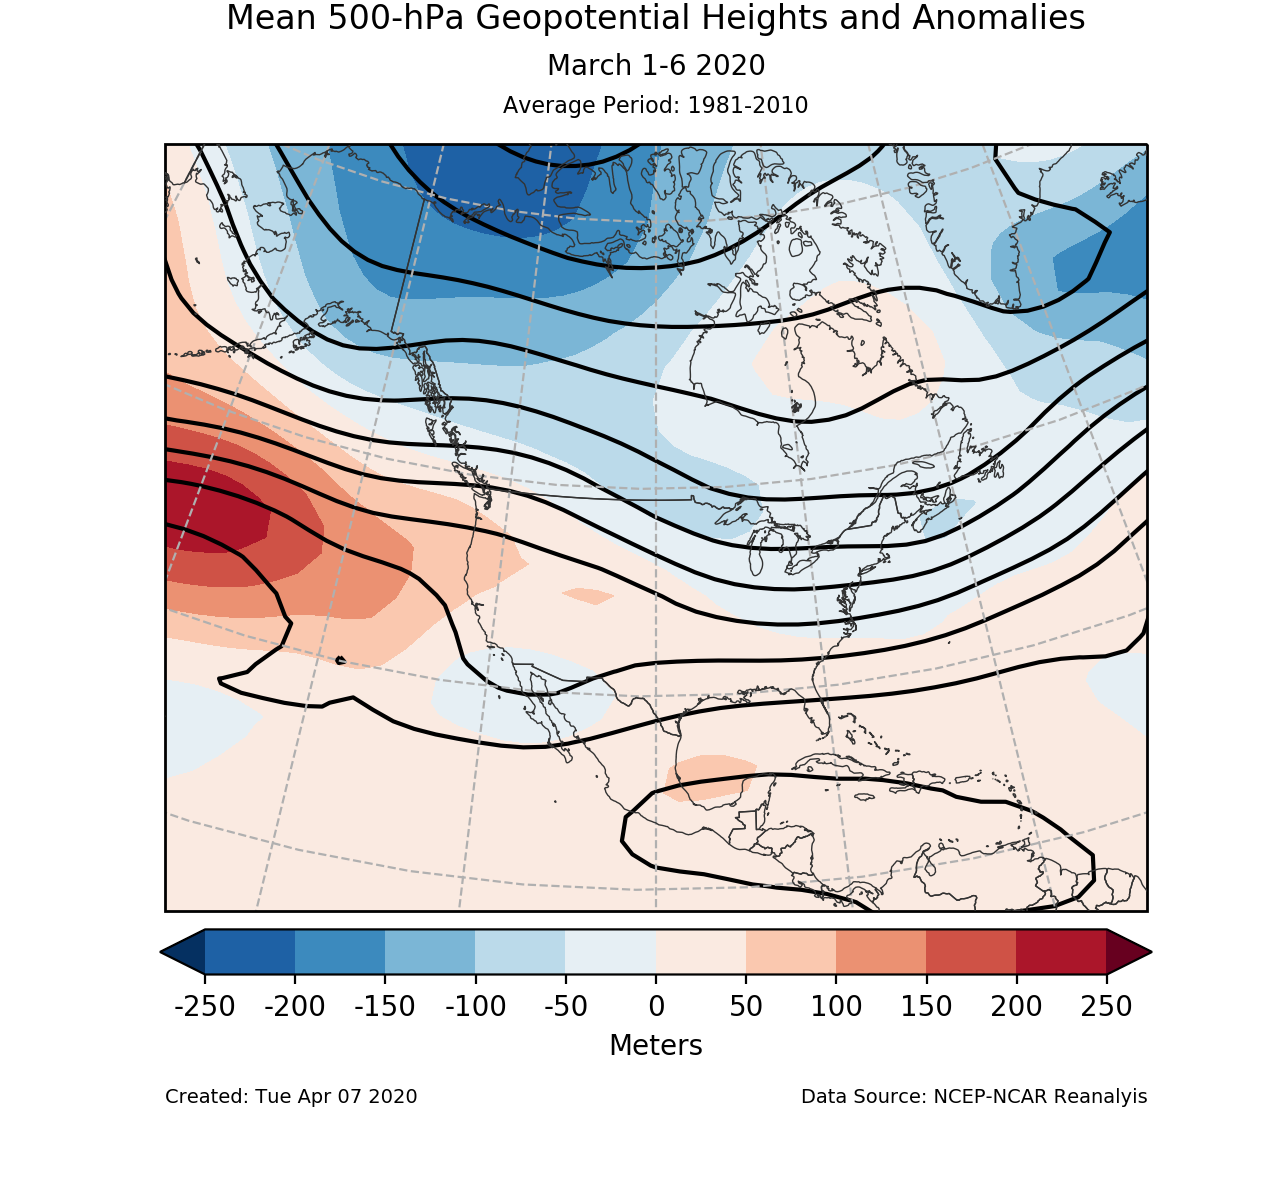 500-mb circulation anomalies for North America for March 1-6 2020